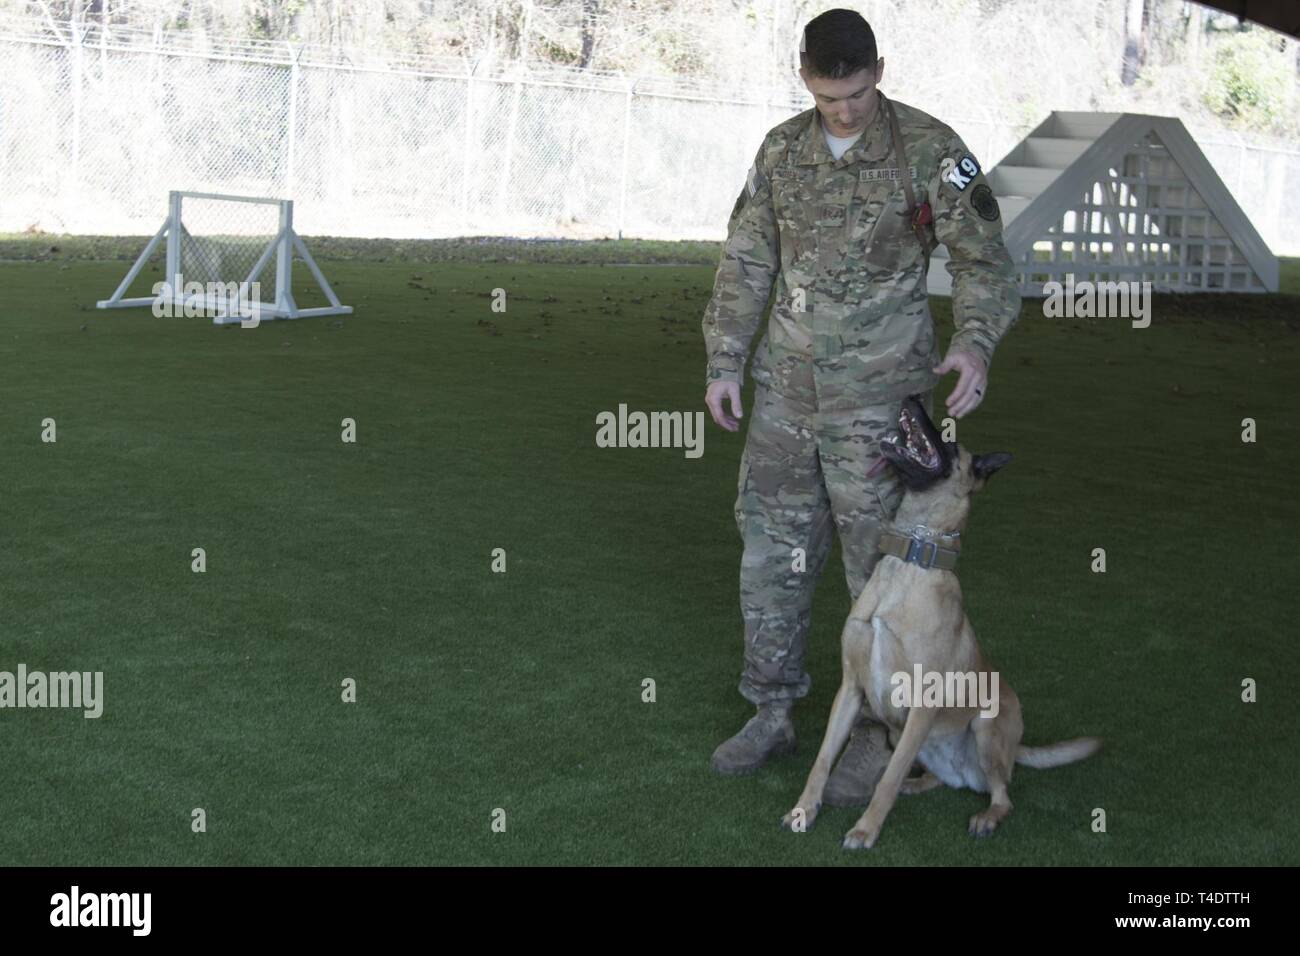 Staff Sgt. Connor Oien, 4th Security Forces Squadron a military working dog handler, gives a command to Tessa, 4th SFS MWD, March 22, 2019, at Seymour Johnson Air Force Base, North Carolina. In order to maintain mission readiness MWD’s continuously train with their handlers. Stock Photo